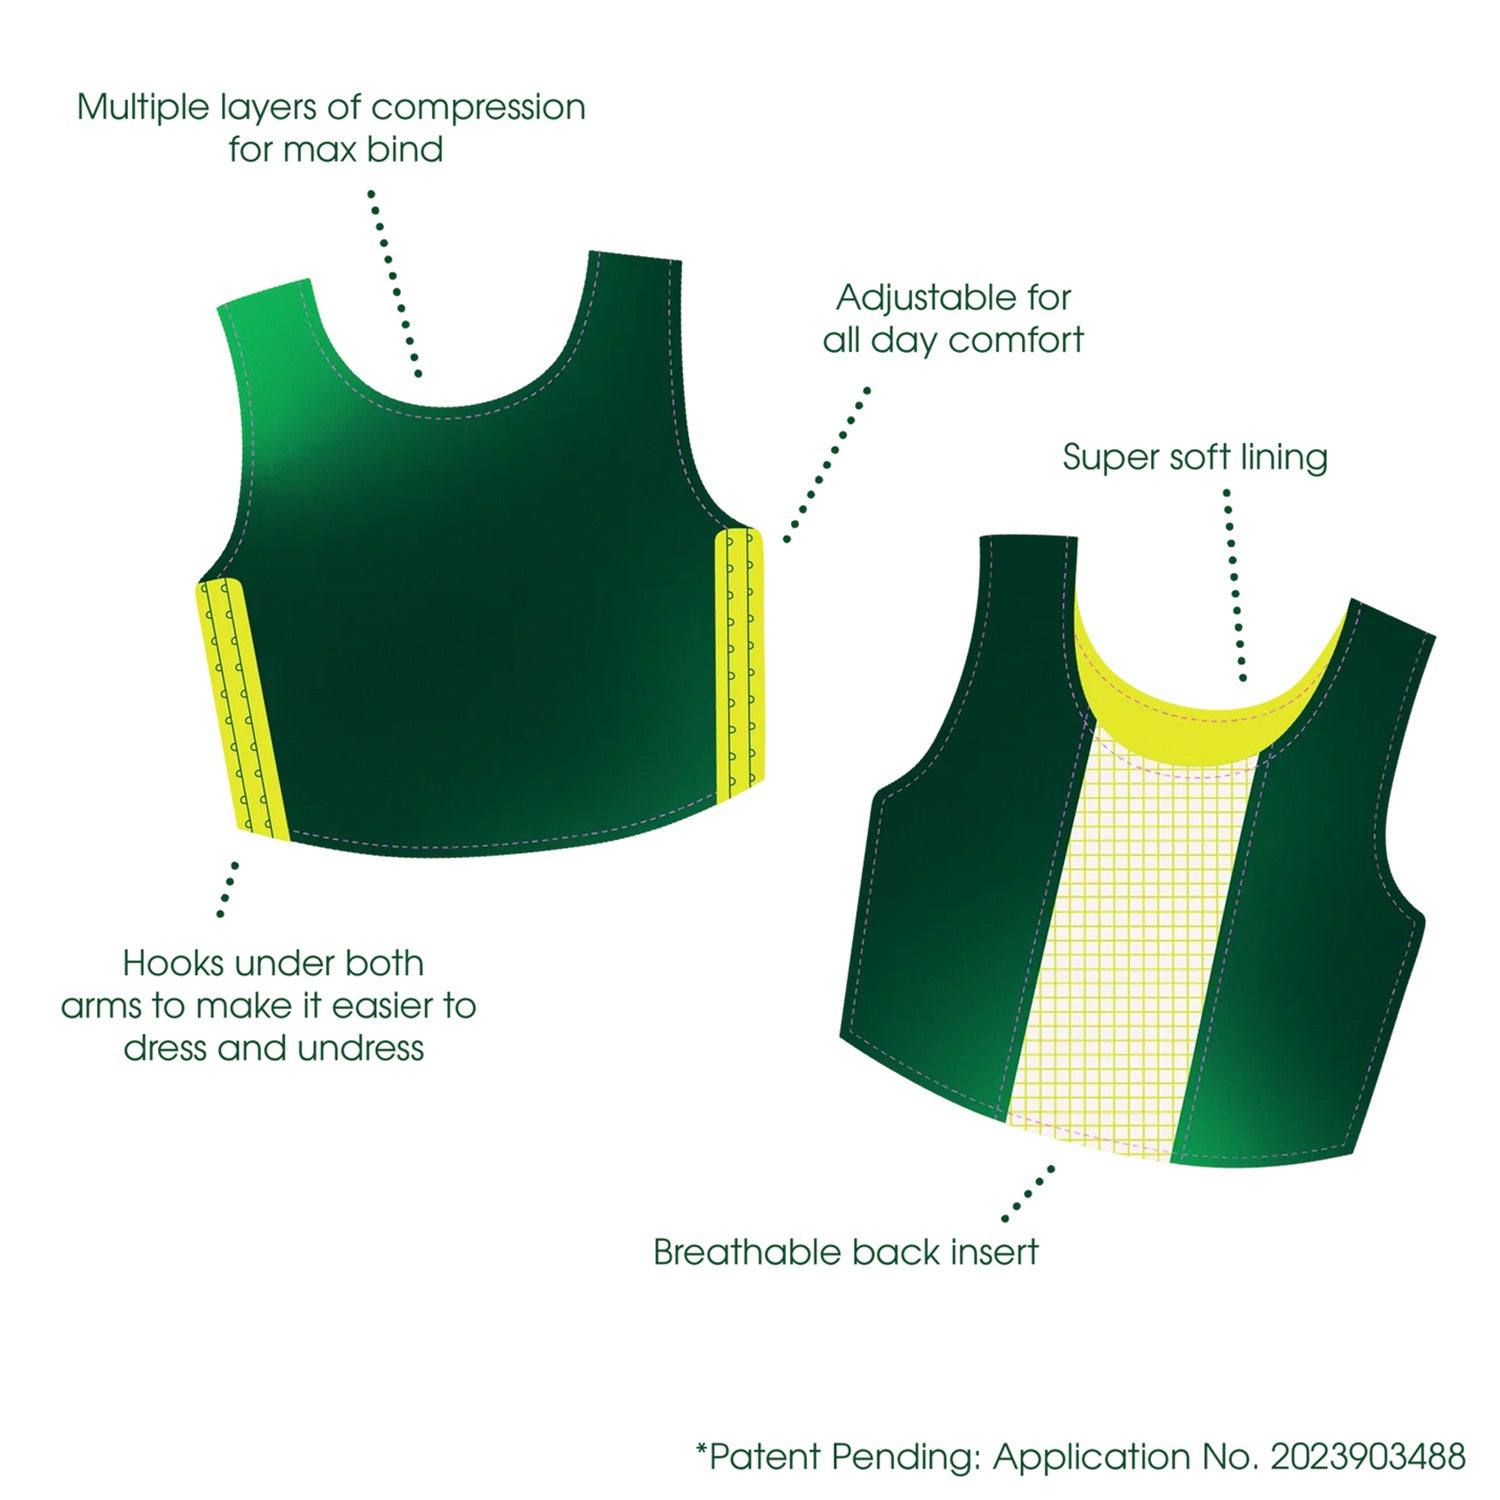 Infographic of chest binder features